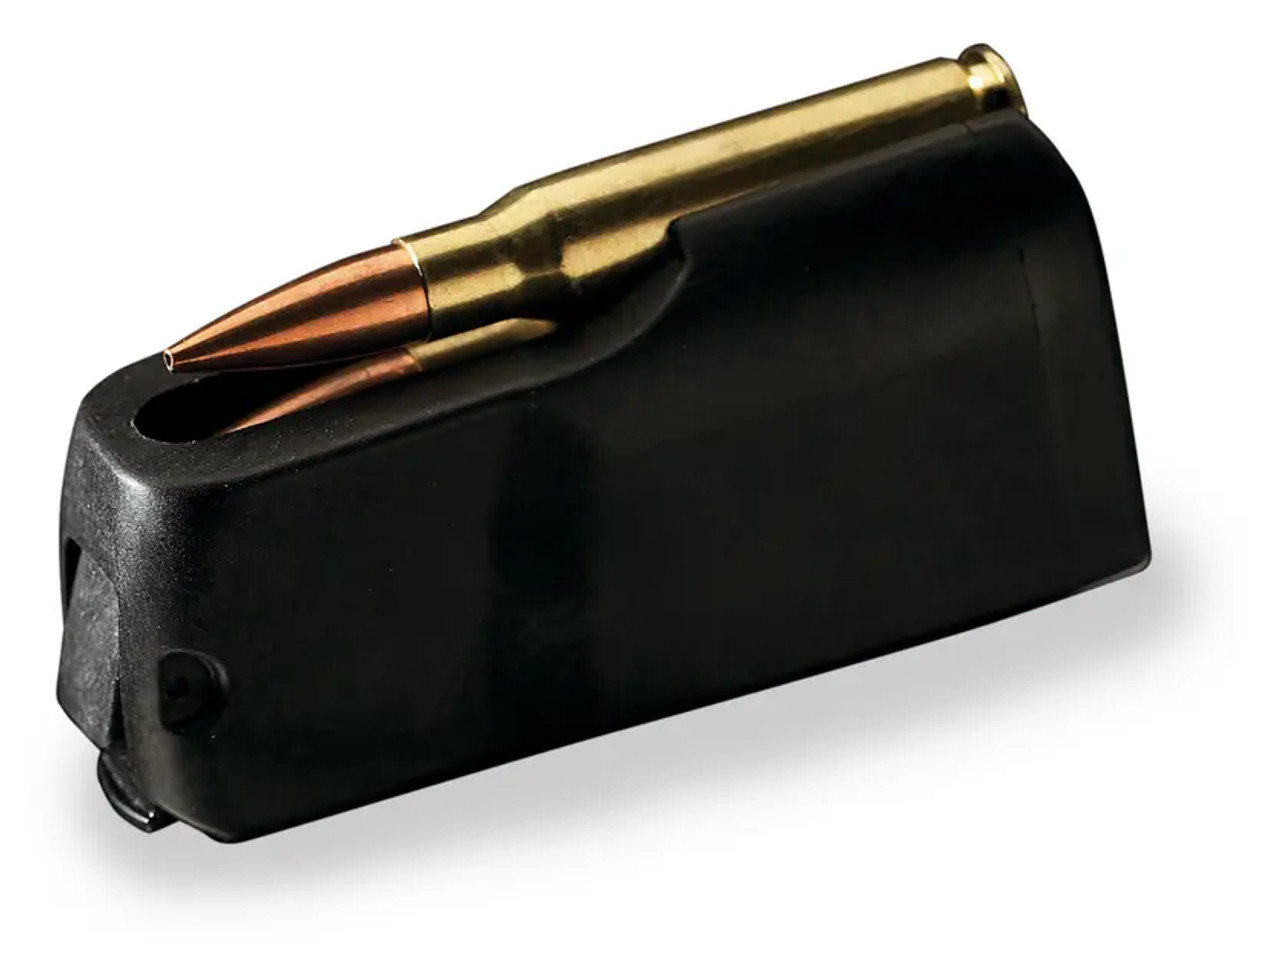 
Overview
There is nothing cheap about the look and feel of the X-Bolt rotary magazine. It's designed to be reliable and endure the punishment that will break lookalikes from competitors. Keep an extra magazine (or two) in your pocket to facilitate a quick reload when it counts.

Features
Detachable rotary magazine constructed from a durable lightweight polymer
Feeds cartridges directly in line with the bolt, instead of offset as with traditional leaf-spring magazines for a straight path right into the chamber
Ergonomic magazine-mounted release
Magnum caliber holds three cartridges
Standard caliber holds four cartridges
Unique design holds U.S. patent numbers: 8,156,675; 8,484,875 and 8,745,912